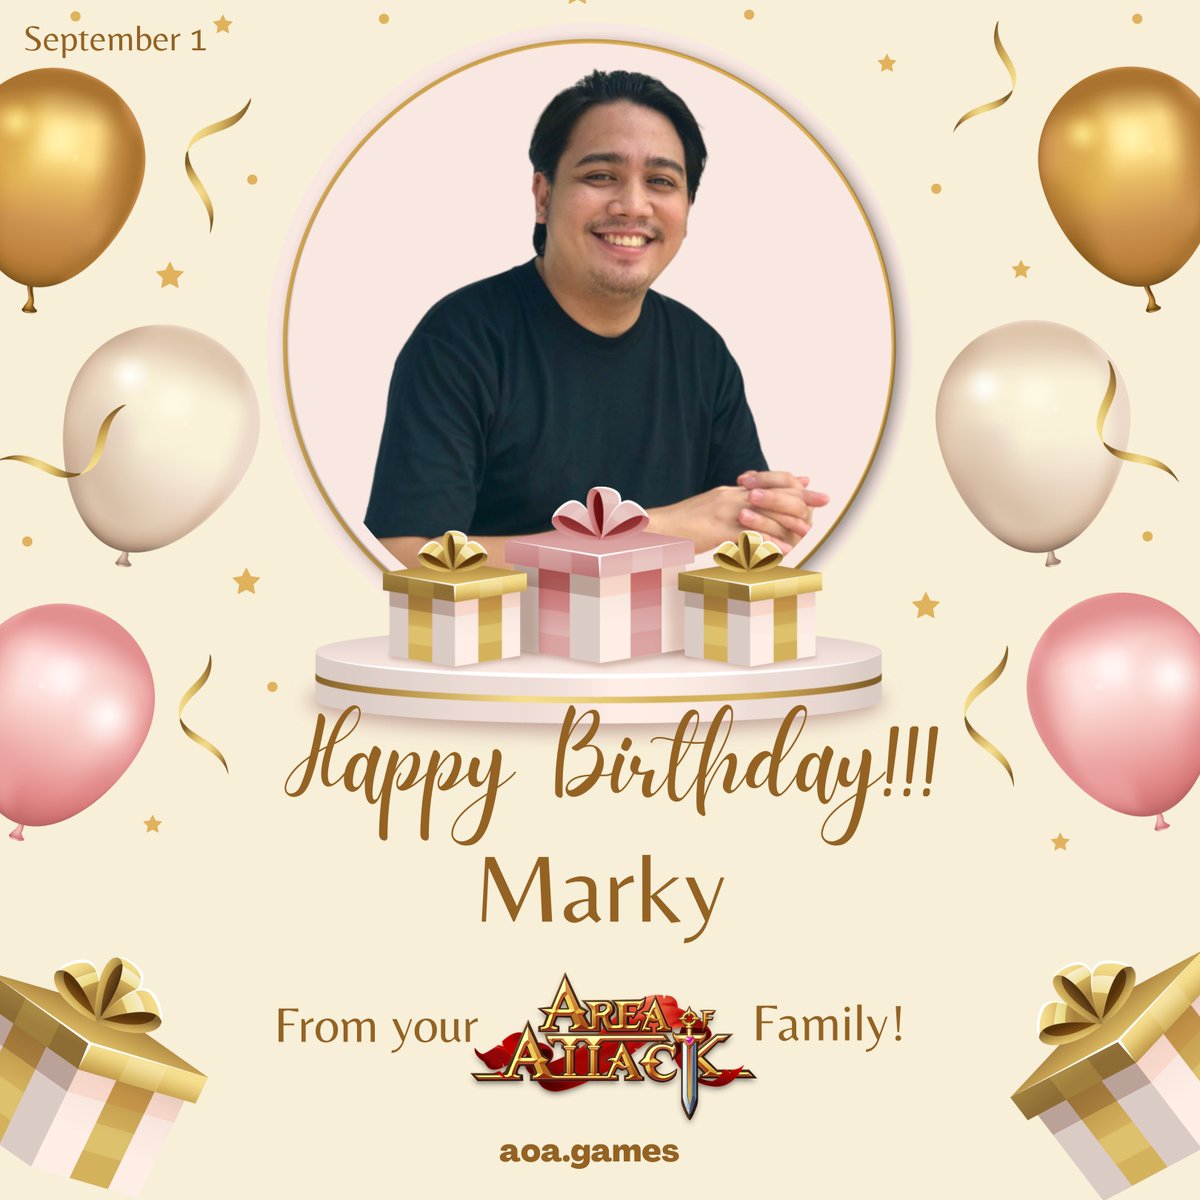 Happy Happy Birthday to our SMM, Marky! @themgorenseph 🎂🥳

Continue to give joy and happiness, you are blessed!

Love,
Area of Attack Family! 💕

#HappyBirthdayMarky #AoABirthday #AreaOfAttack #AoAFamily